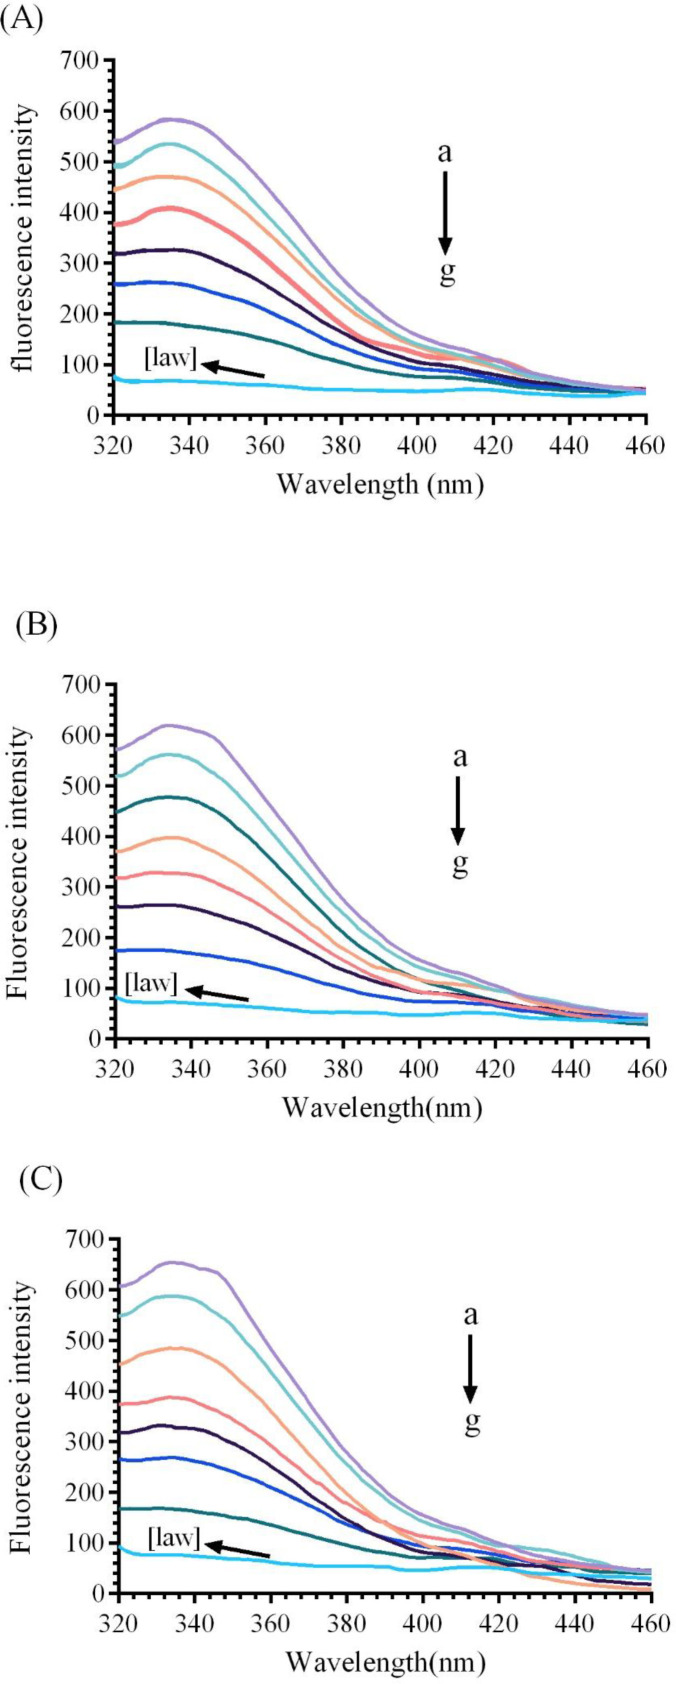 Fluorescence emission spectra of bovine liver catalase (BLC) in the presence or absence of different concentrations of LAW at 280 nm excitation wavelength, BLC concentration: (0.7 µM); LAW concentrations:(a) 0, (b) 0.47, (c) 4.7, (d) 11.8, (e) 14.2, (f) 23.6 and (g) 37.8 µM, (h) only LAW, 0.7 µM, (A) 298 K, (B) 303 K, (C) 310 K